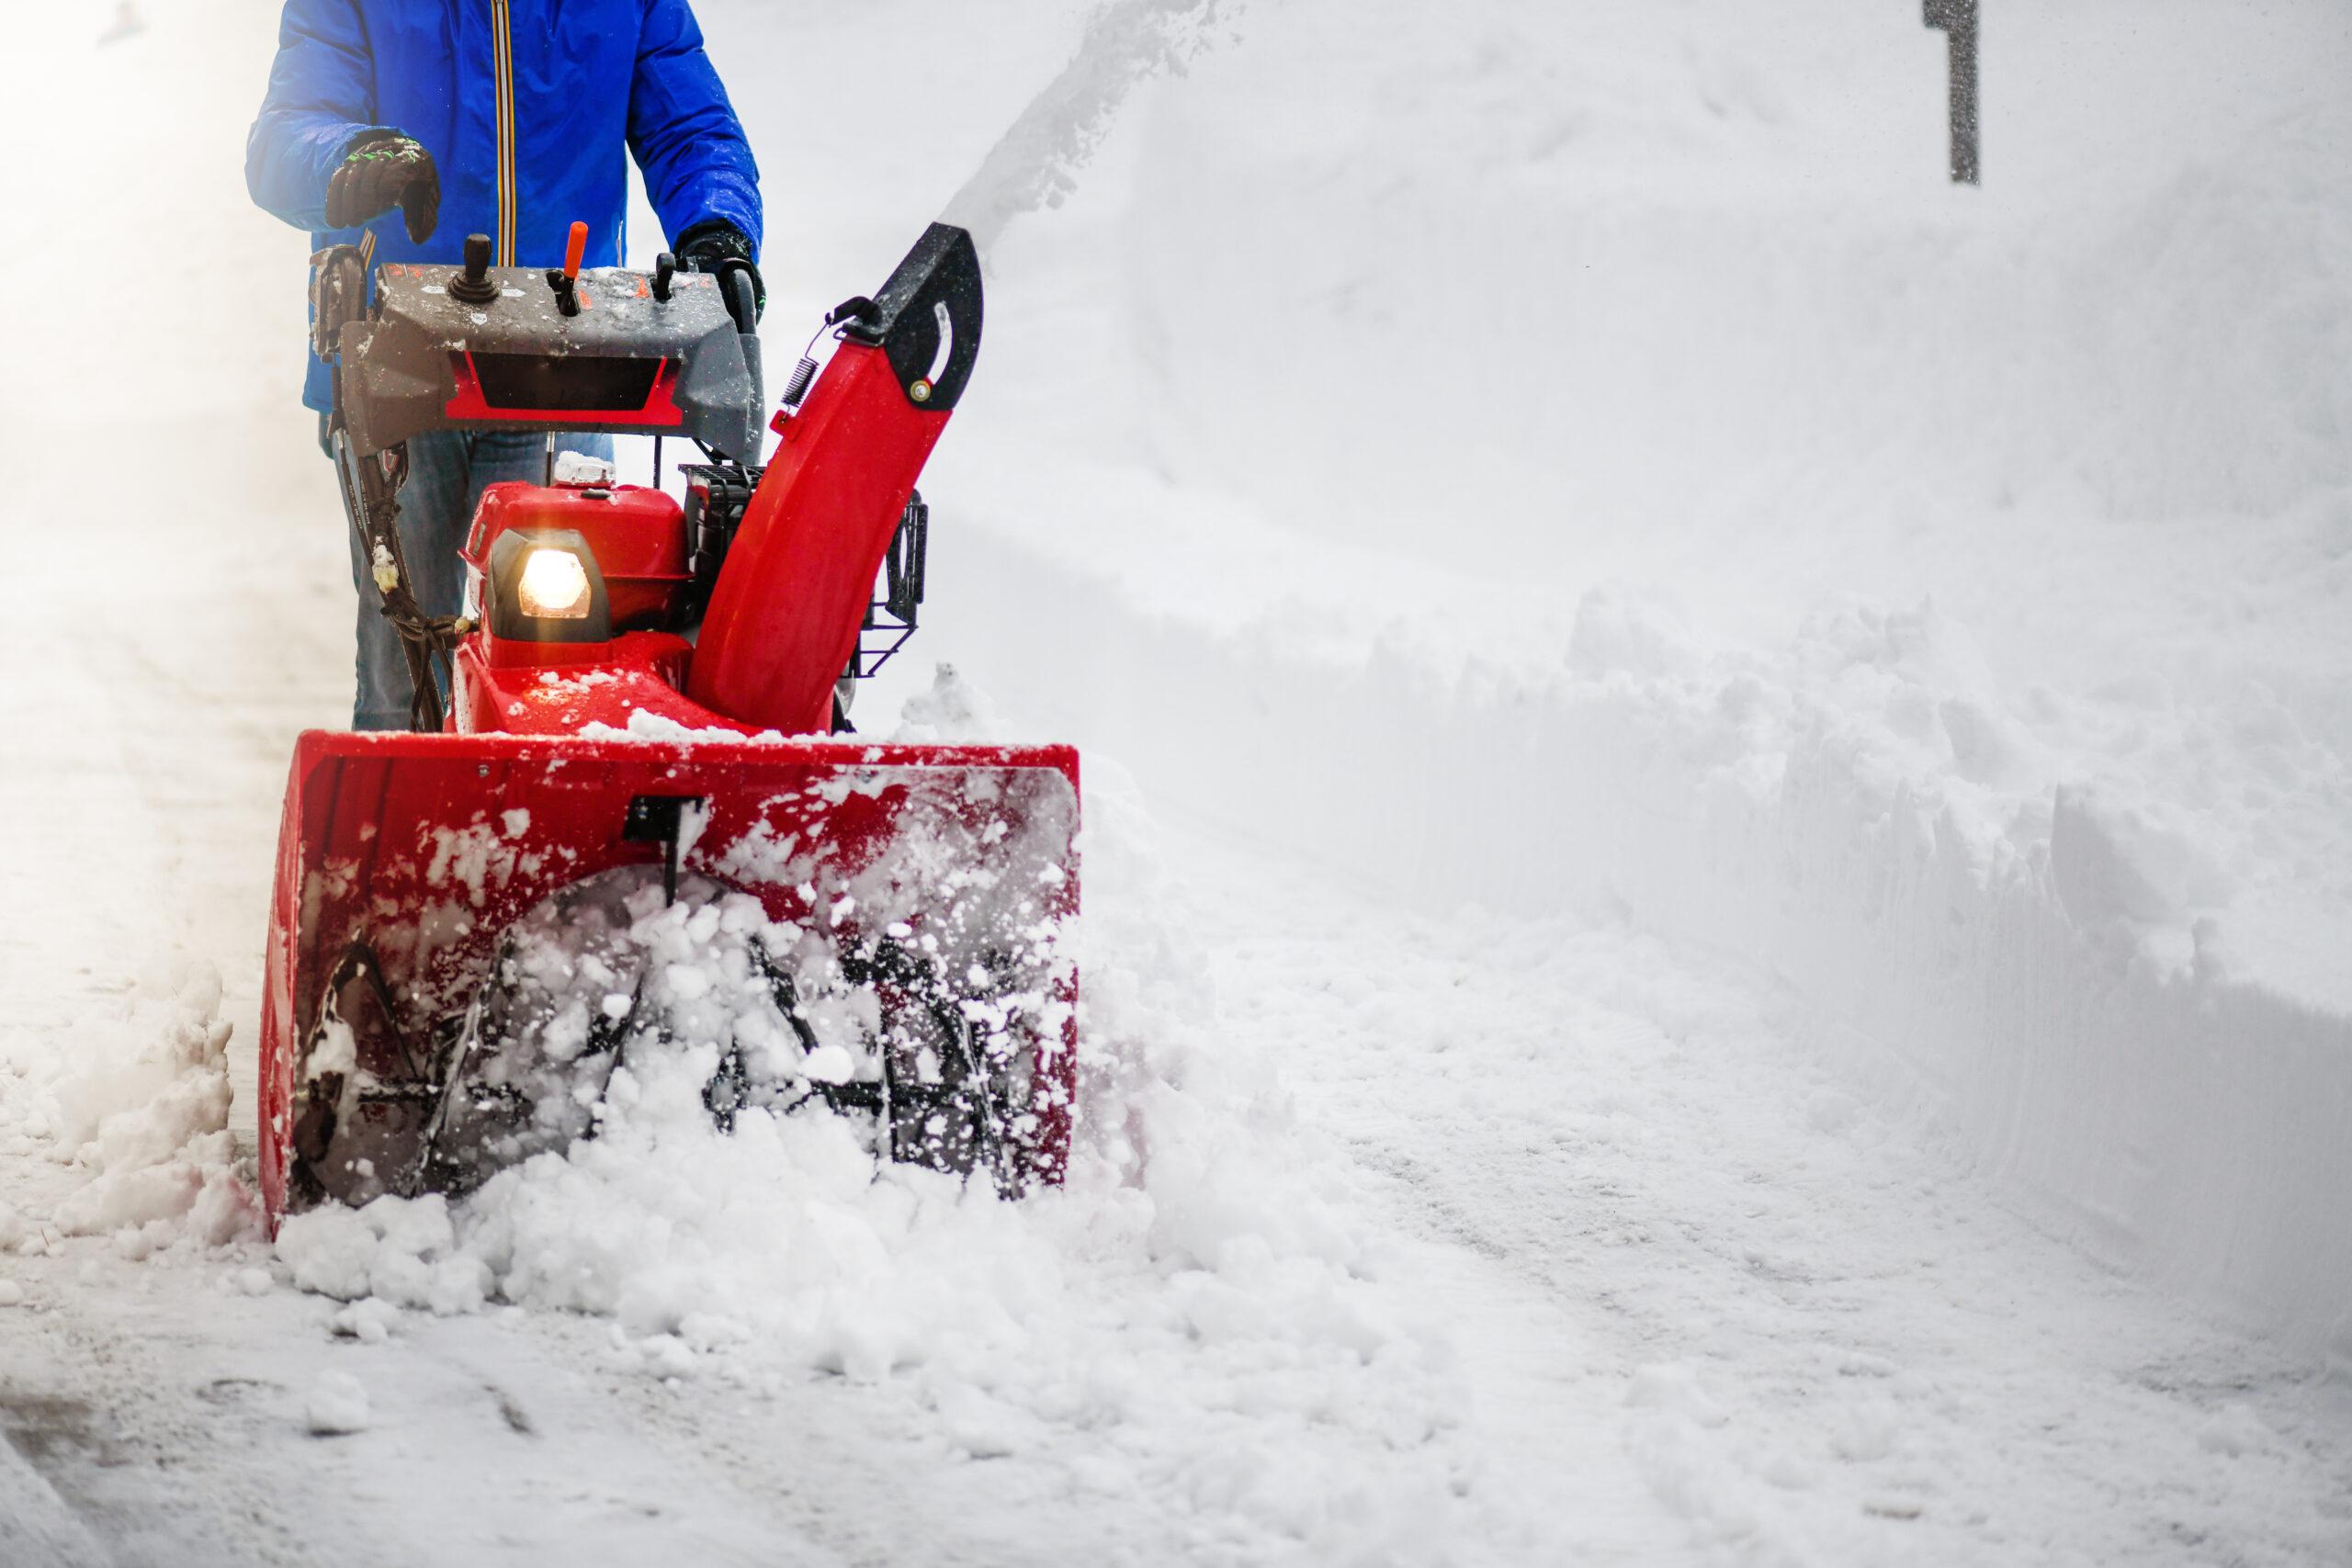 Snow Removal Expertise by Argent Solutions: Keeping Your Property Safe and Accessible